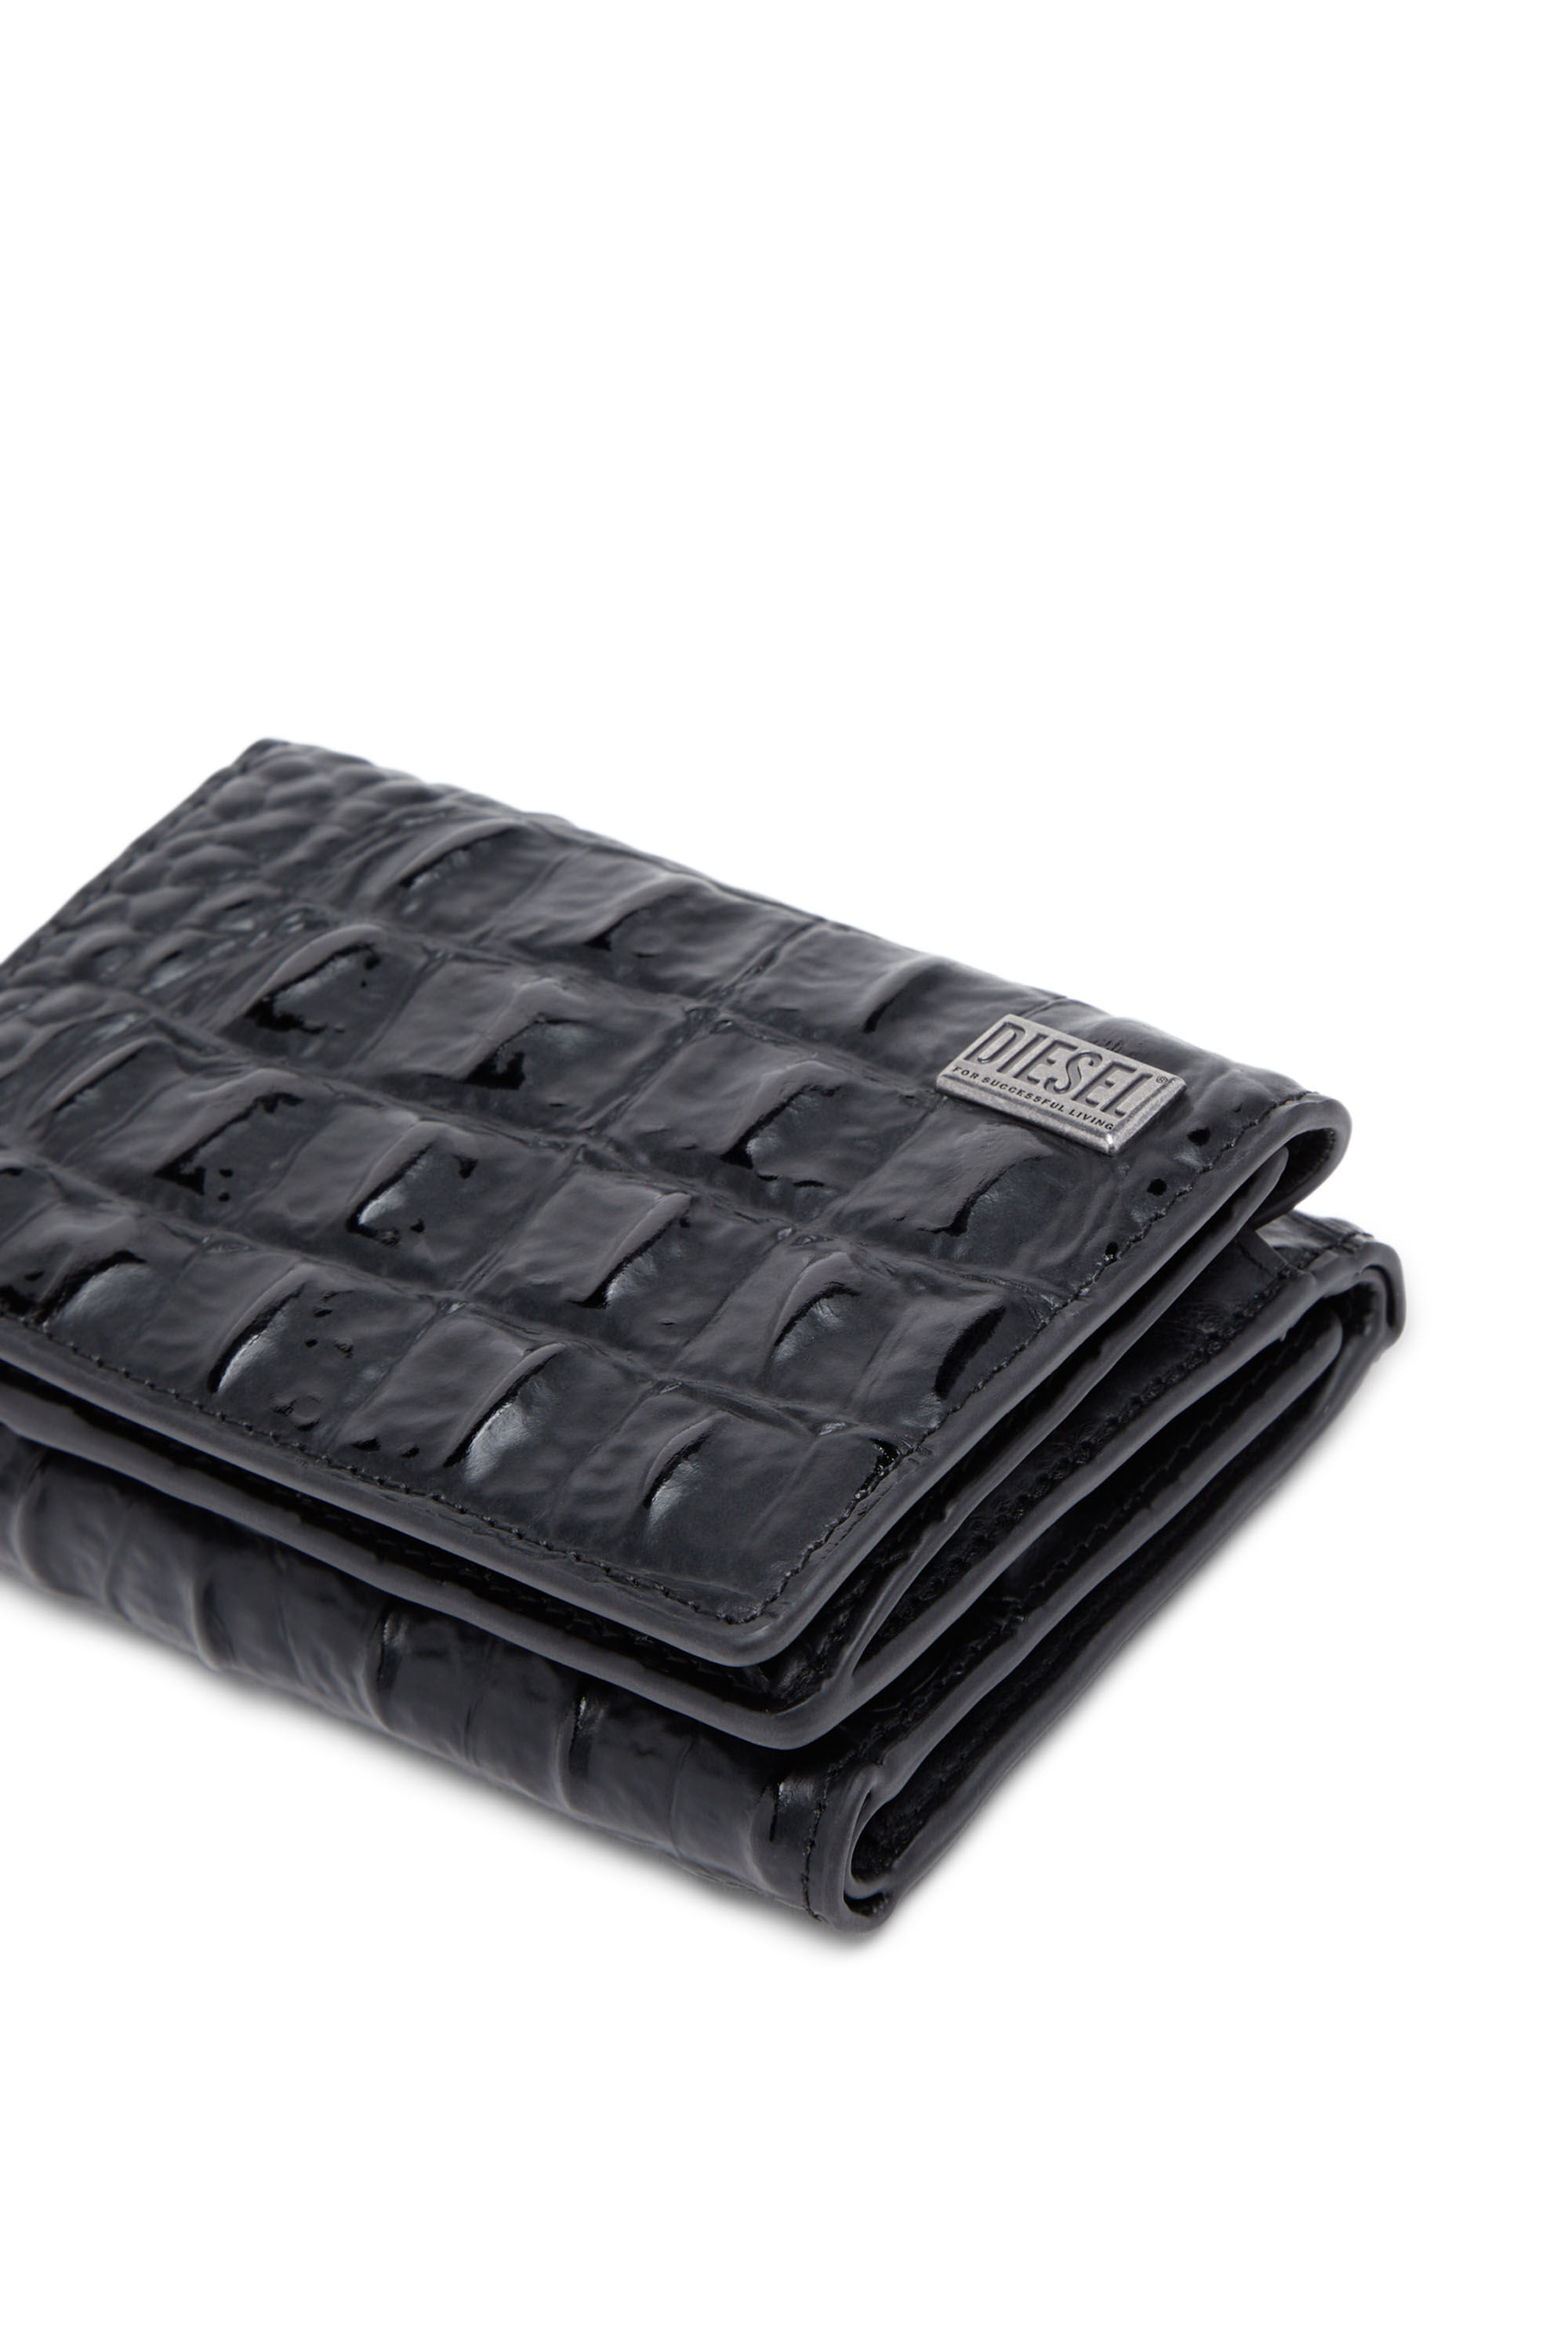 TRI-FOLD COIN S Tri-fold wallet in croc-effect leather｜ブラック 